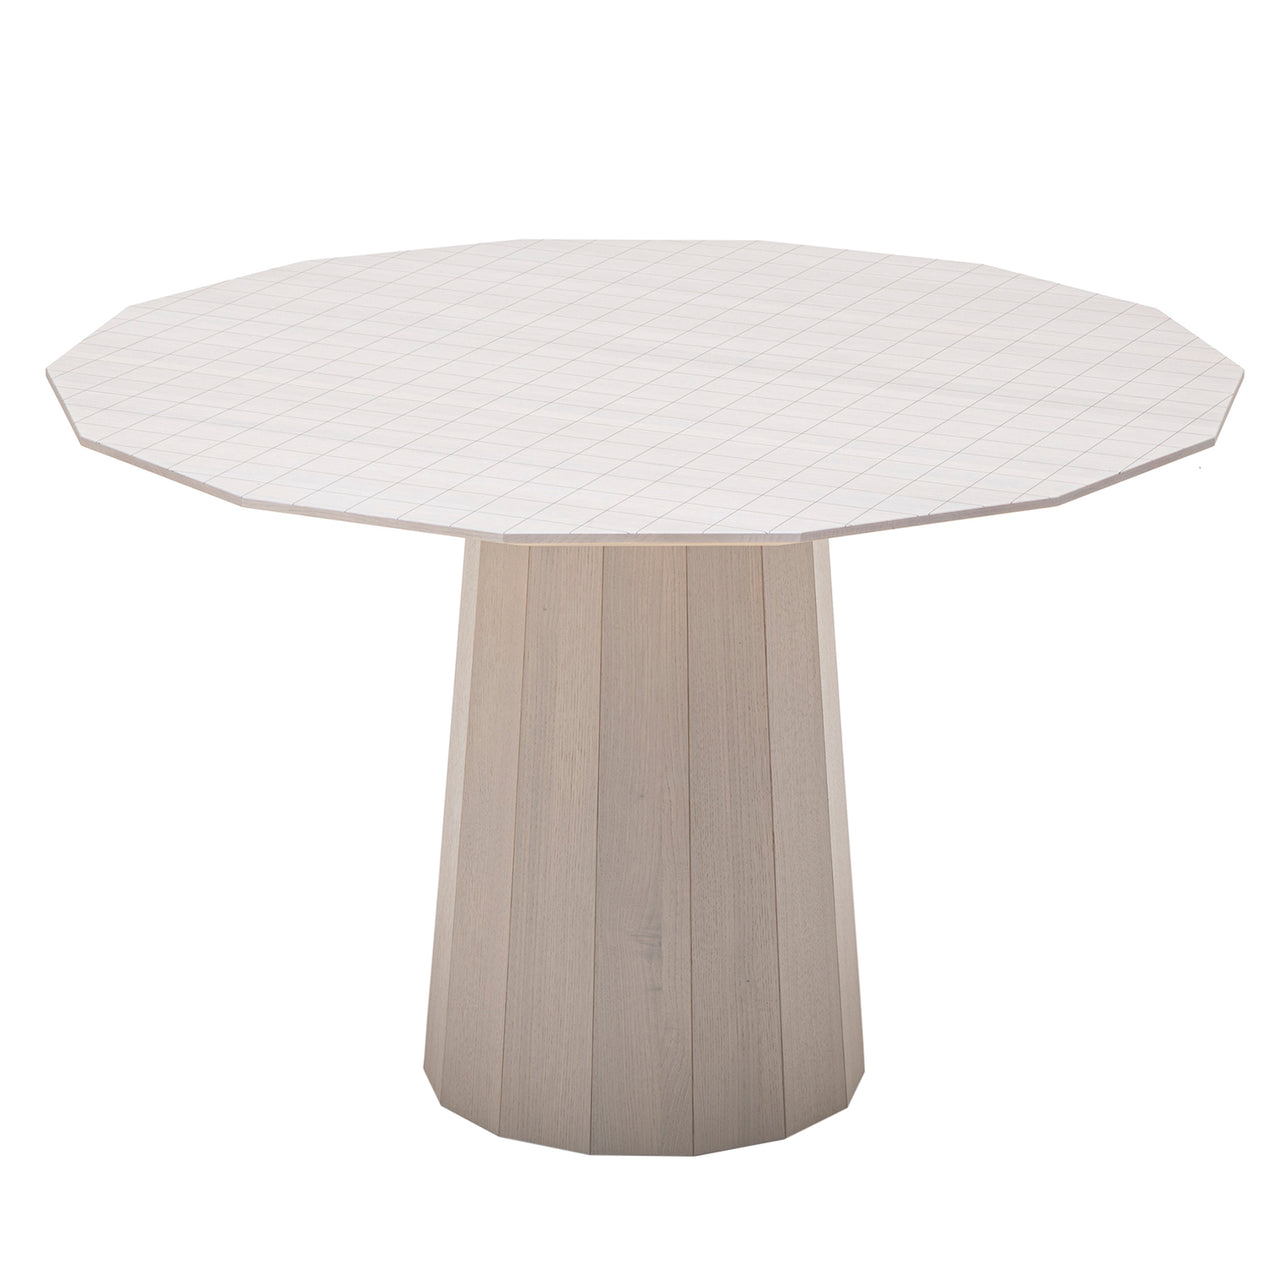 Colour Wood Dining Table: Large - 47.2